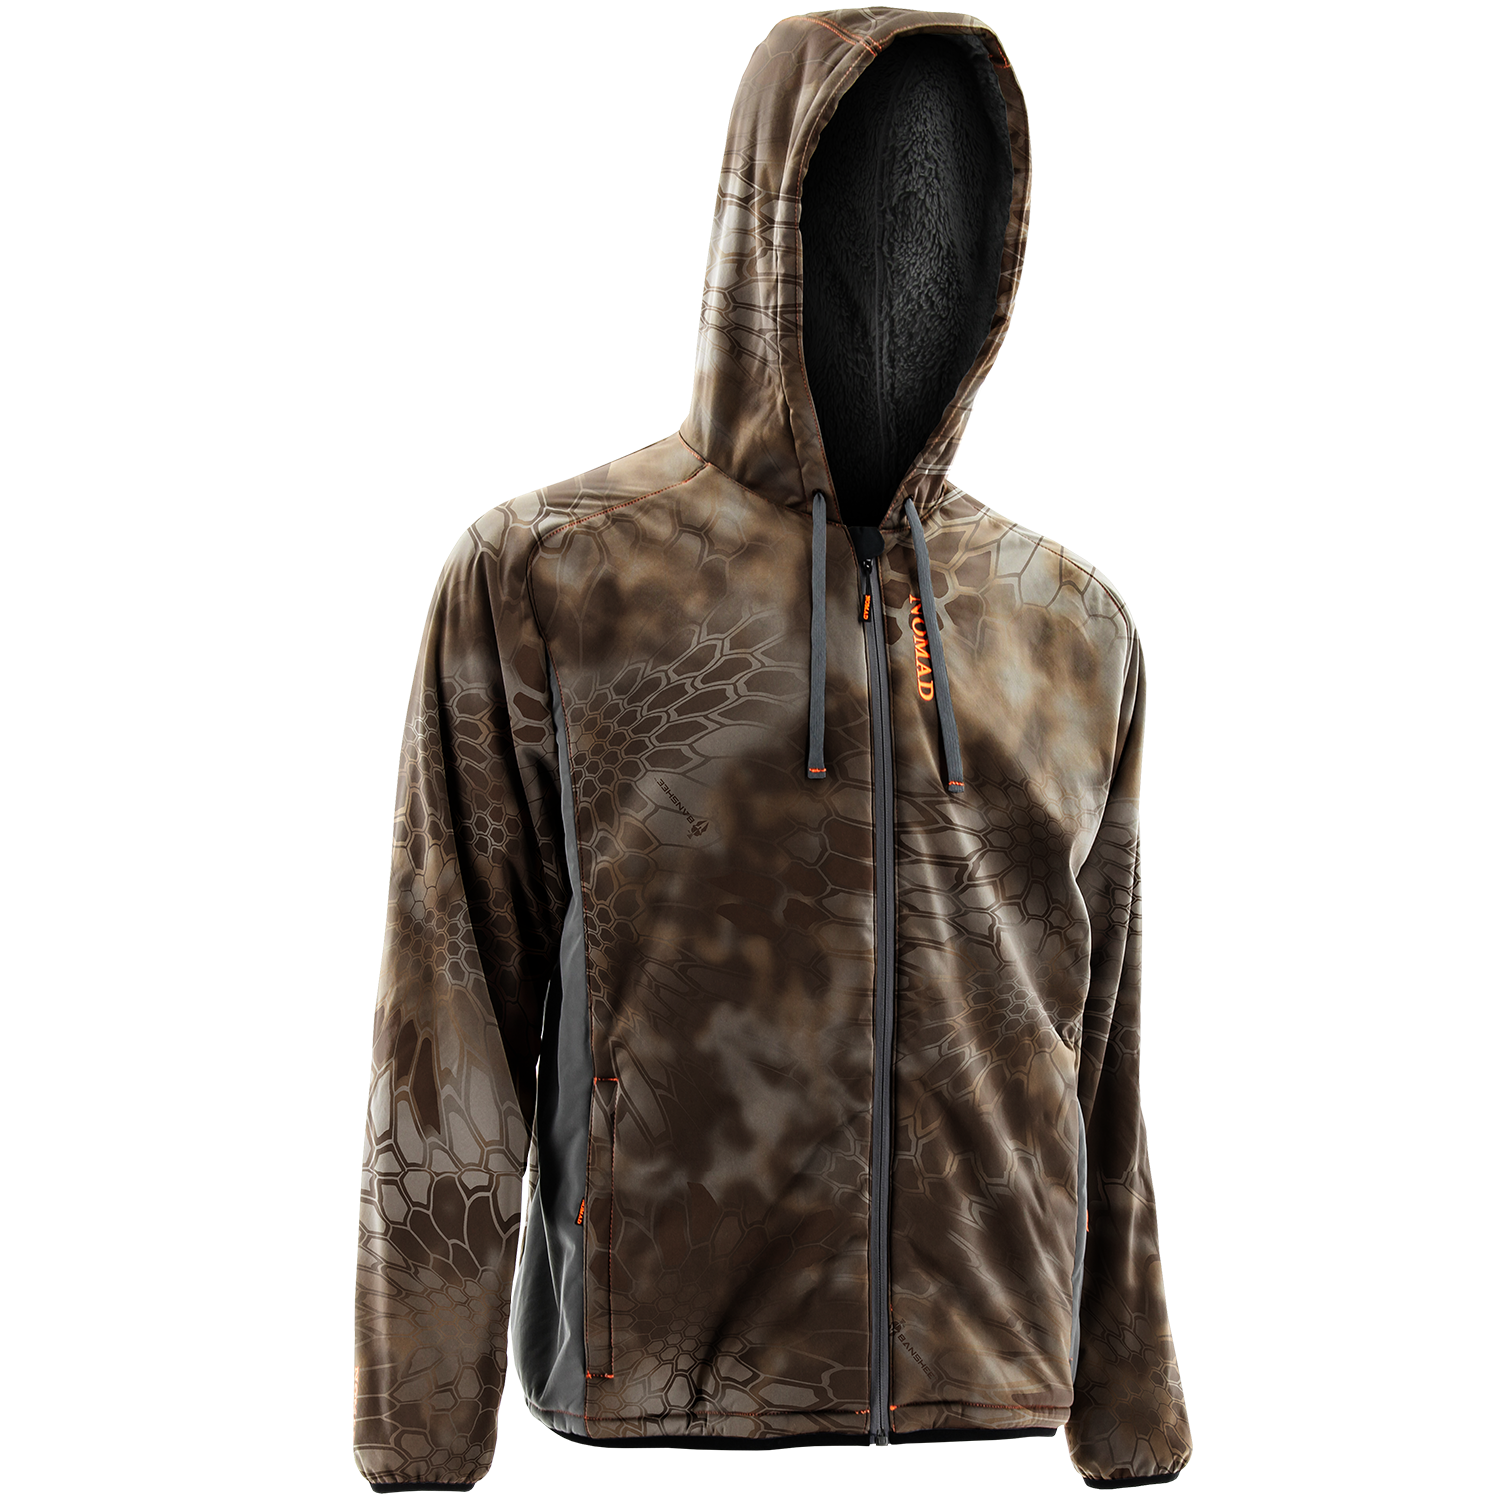 Hot Gear: Nomad Expands Line of Hunting Apparel